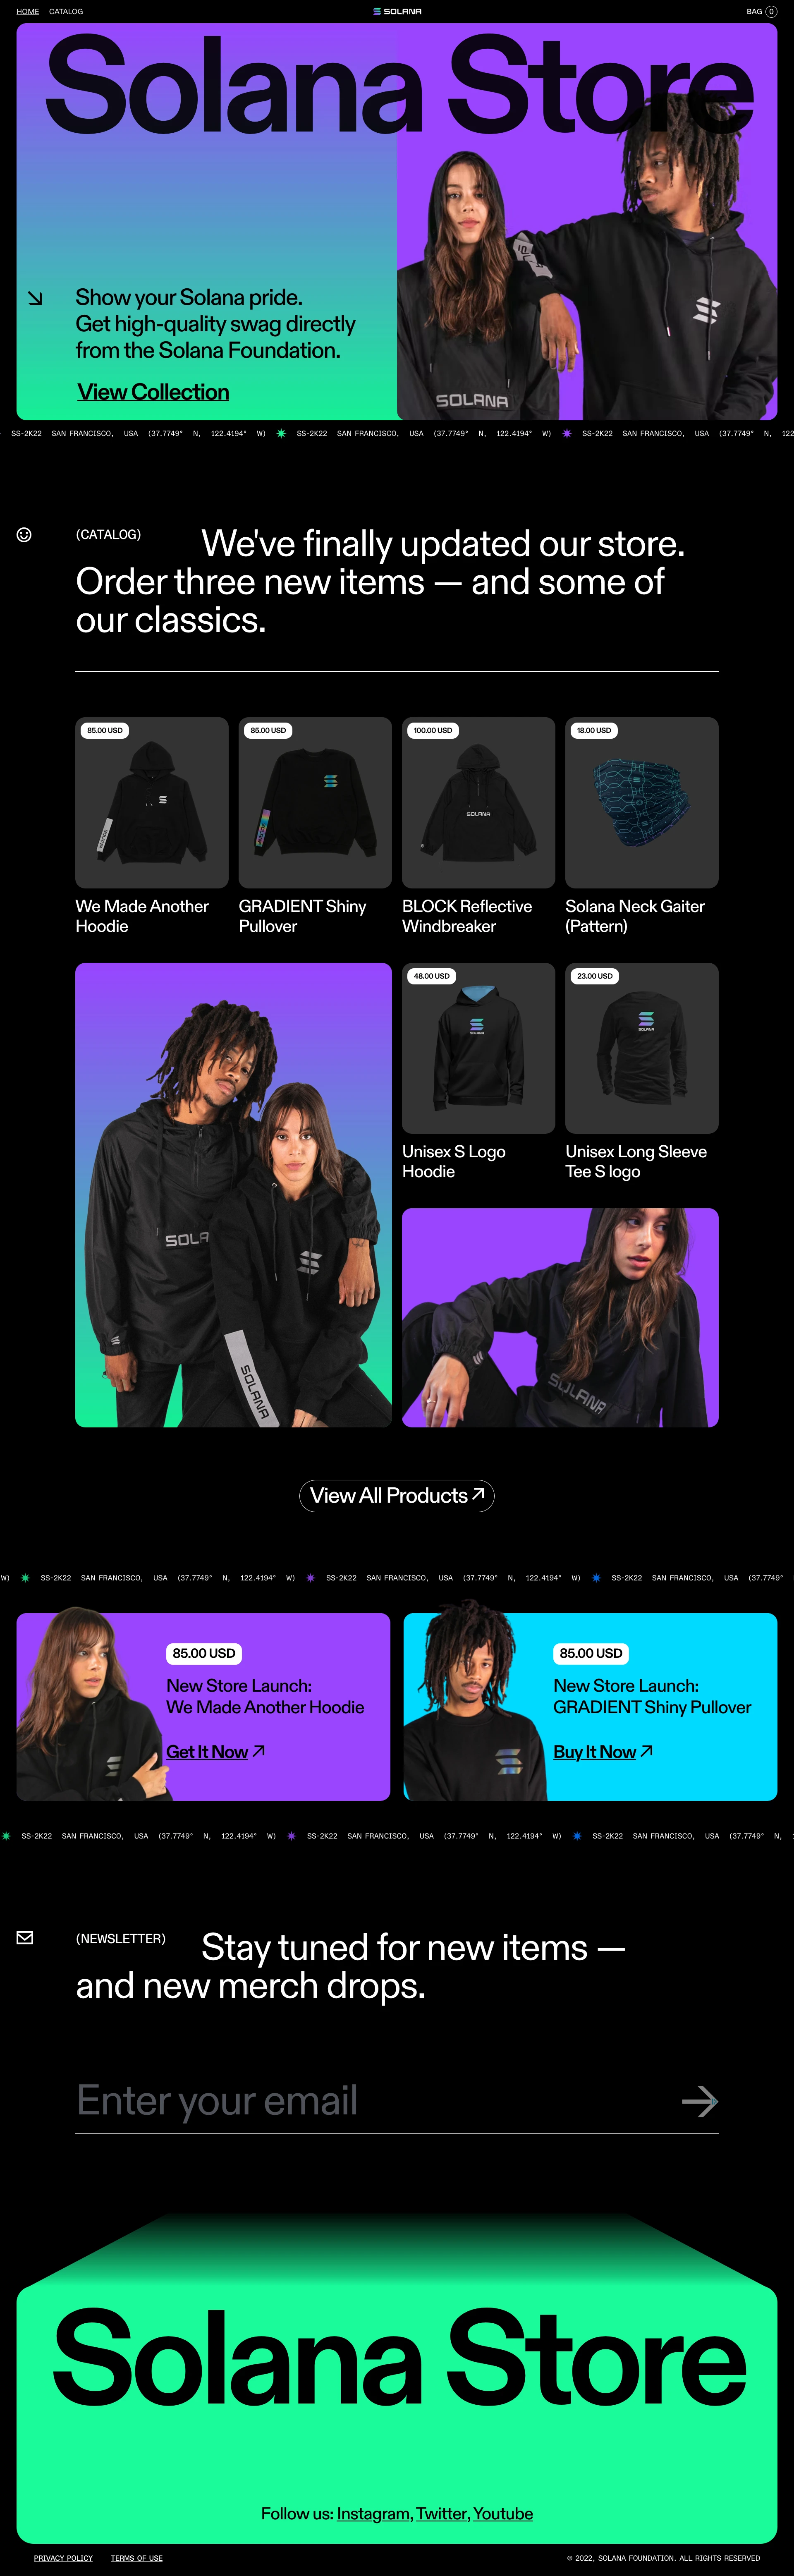 Solana Store Landing Page Example: Show your Solana pride. Get high-quality swag directly from the Solana Foundation.